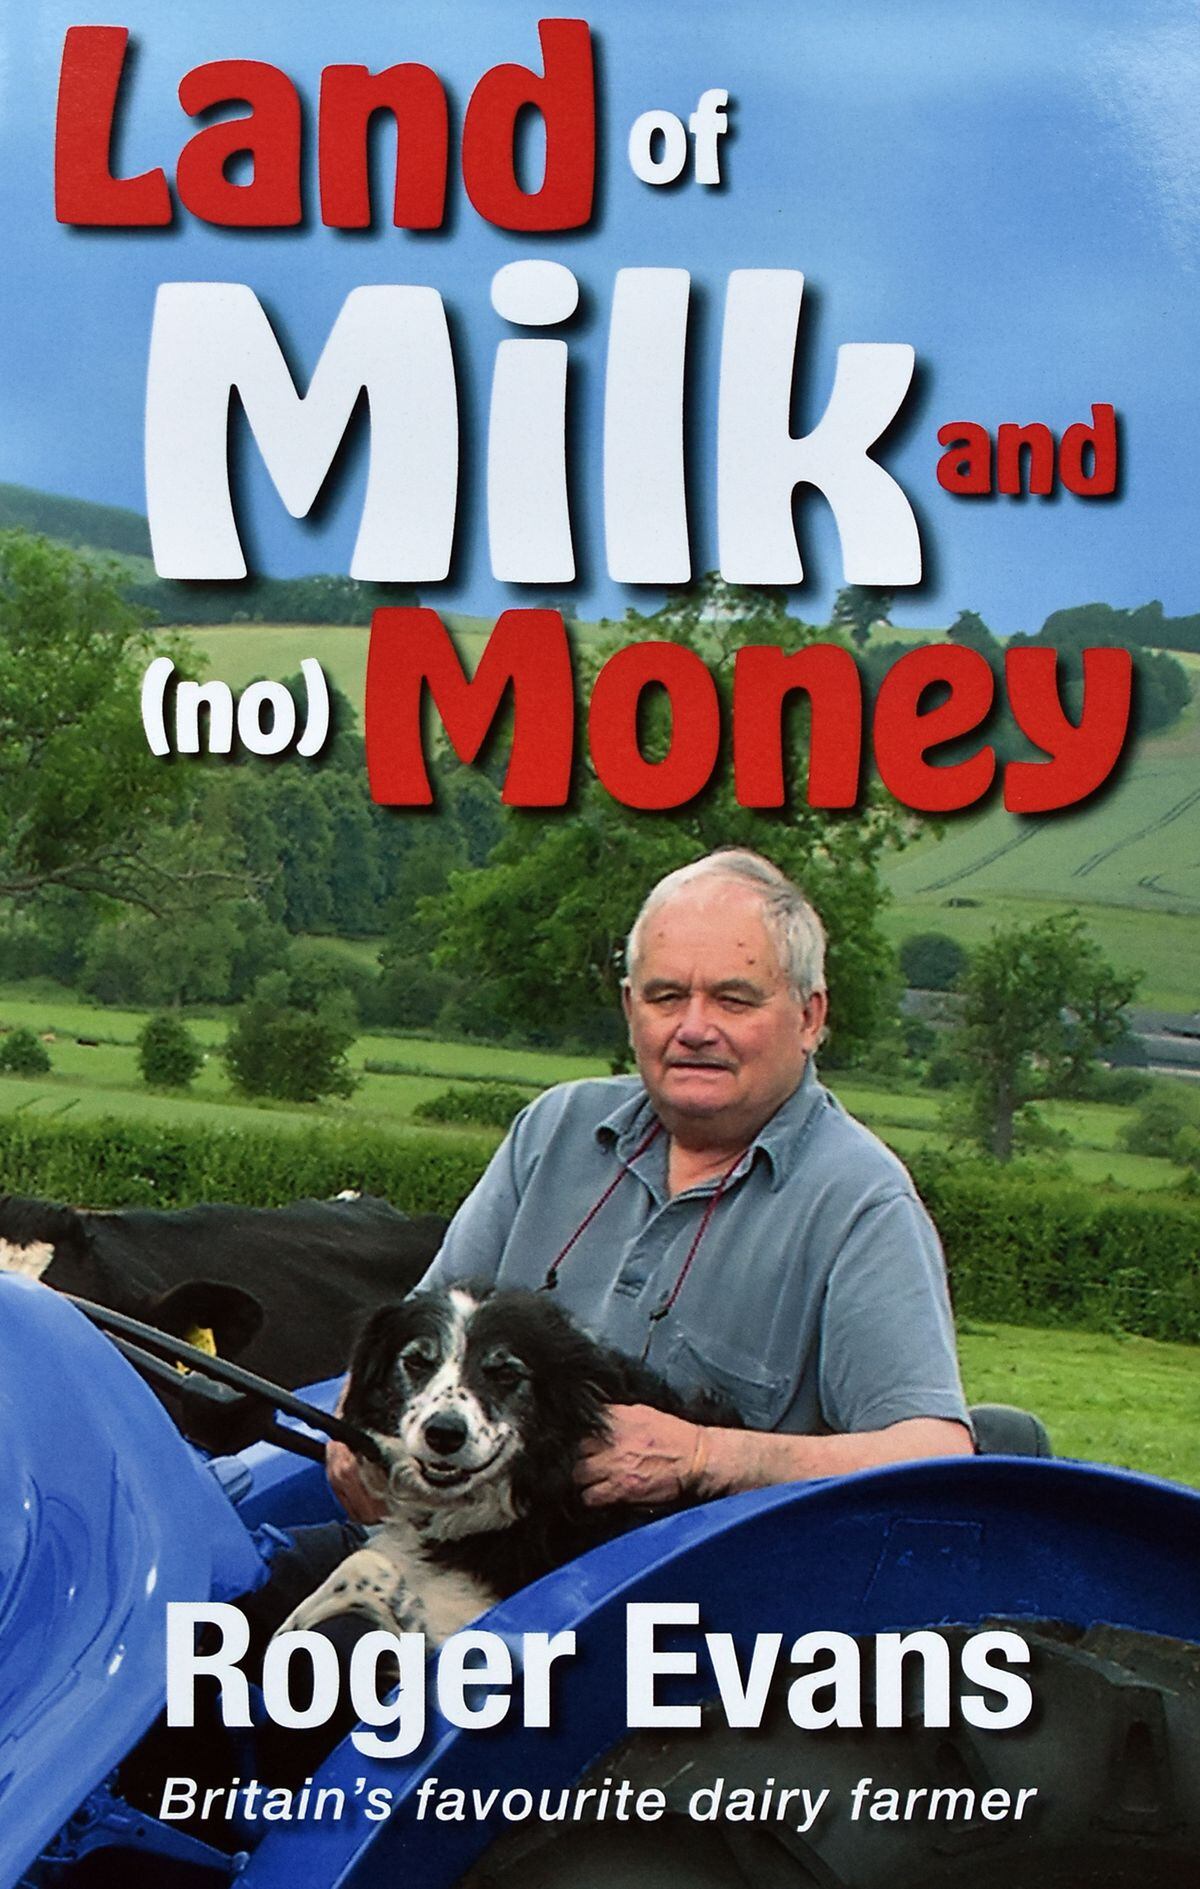 Roger's latest book